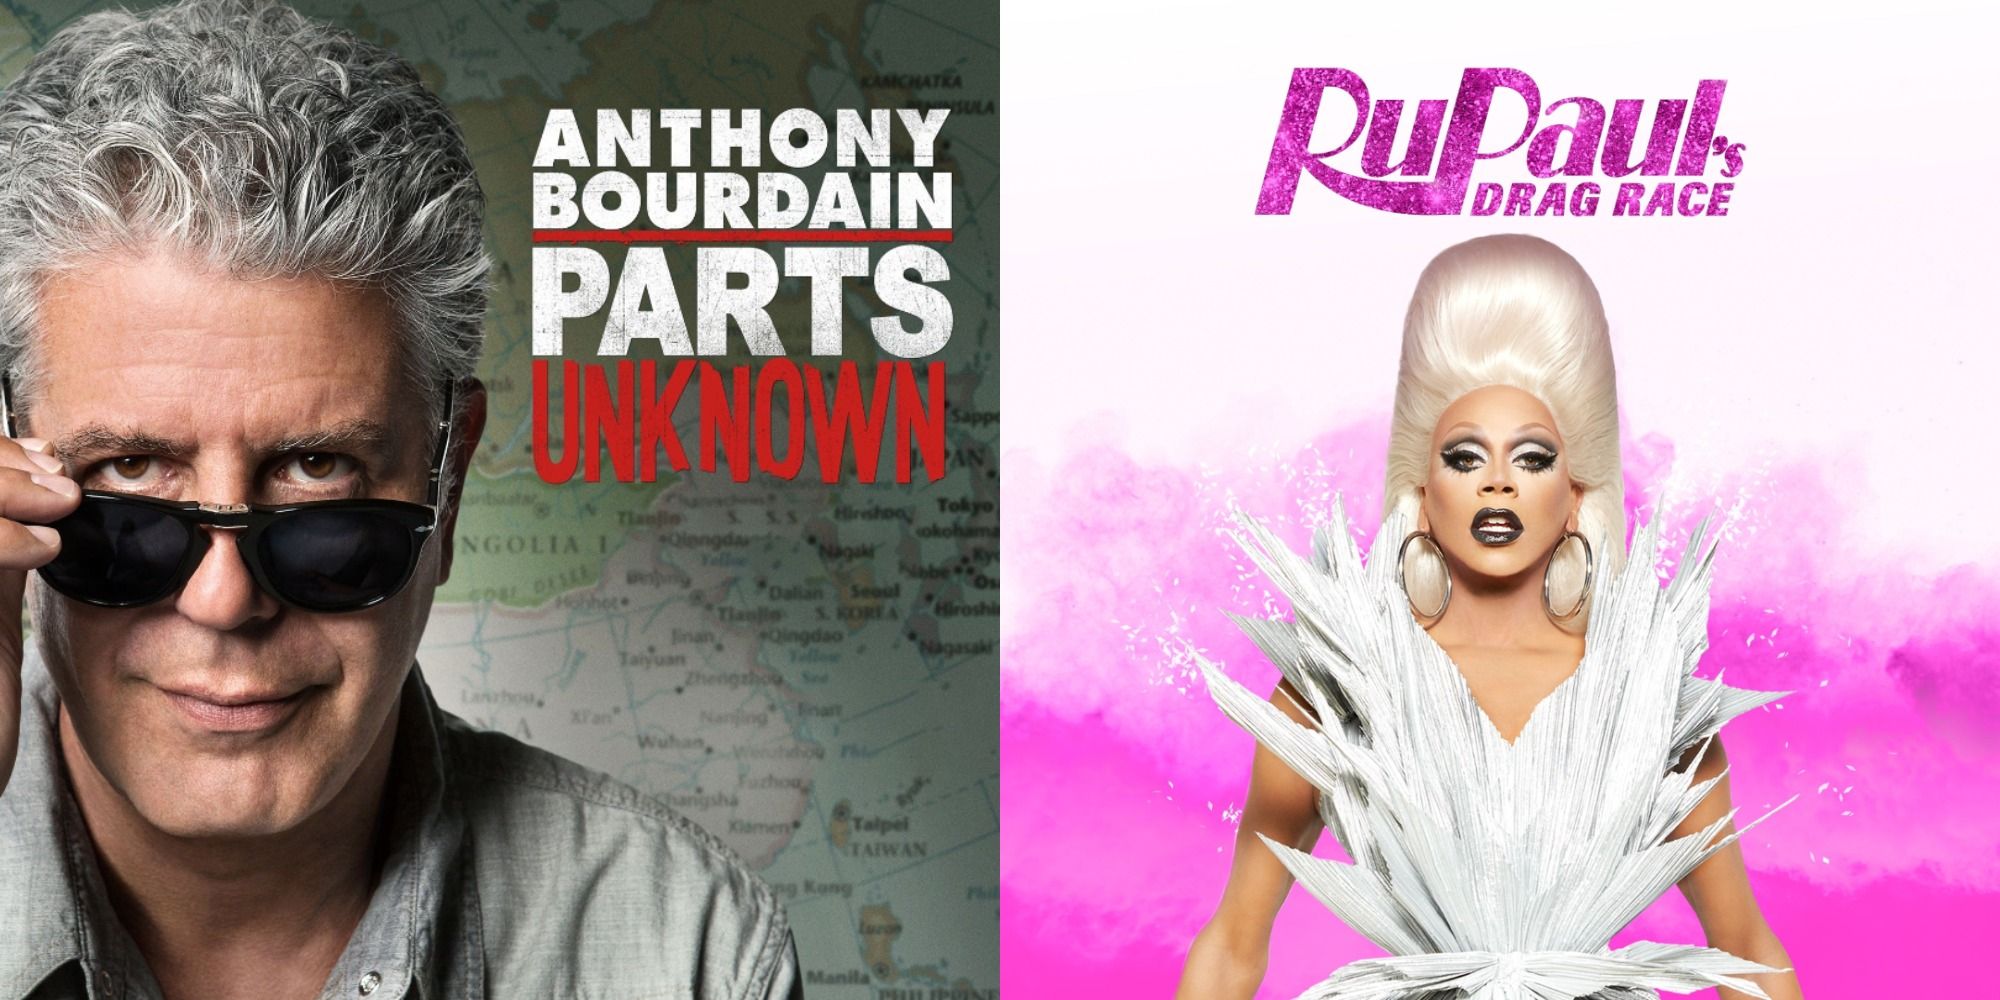 Split image showing Anthony Bourdain in Parts Unknown and RuPaul in Drag Race